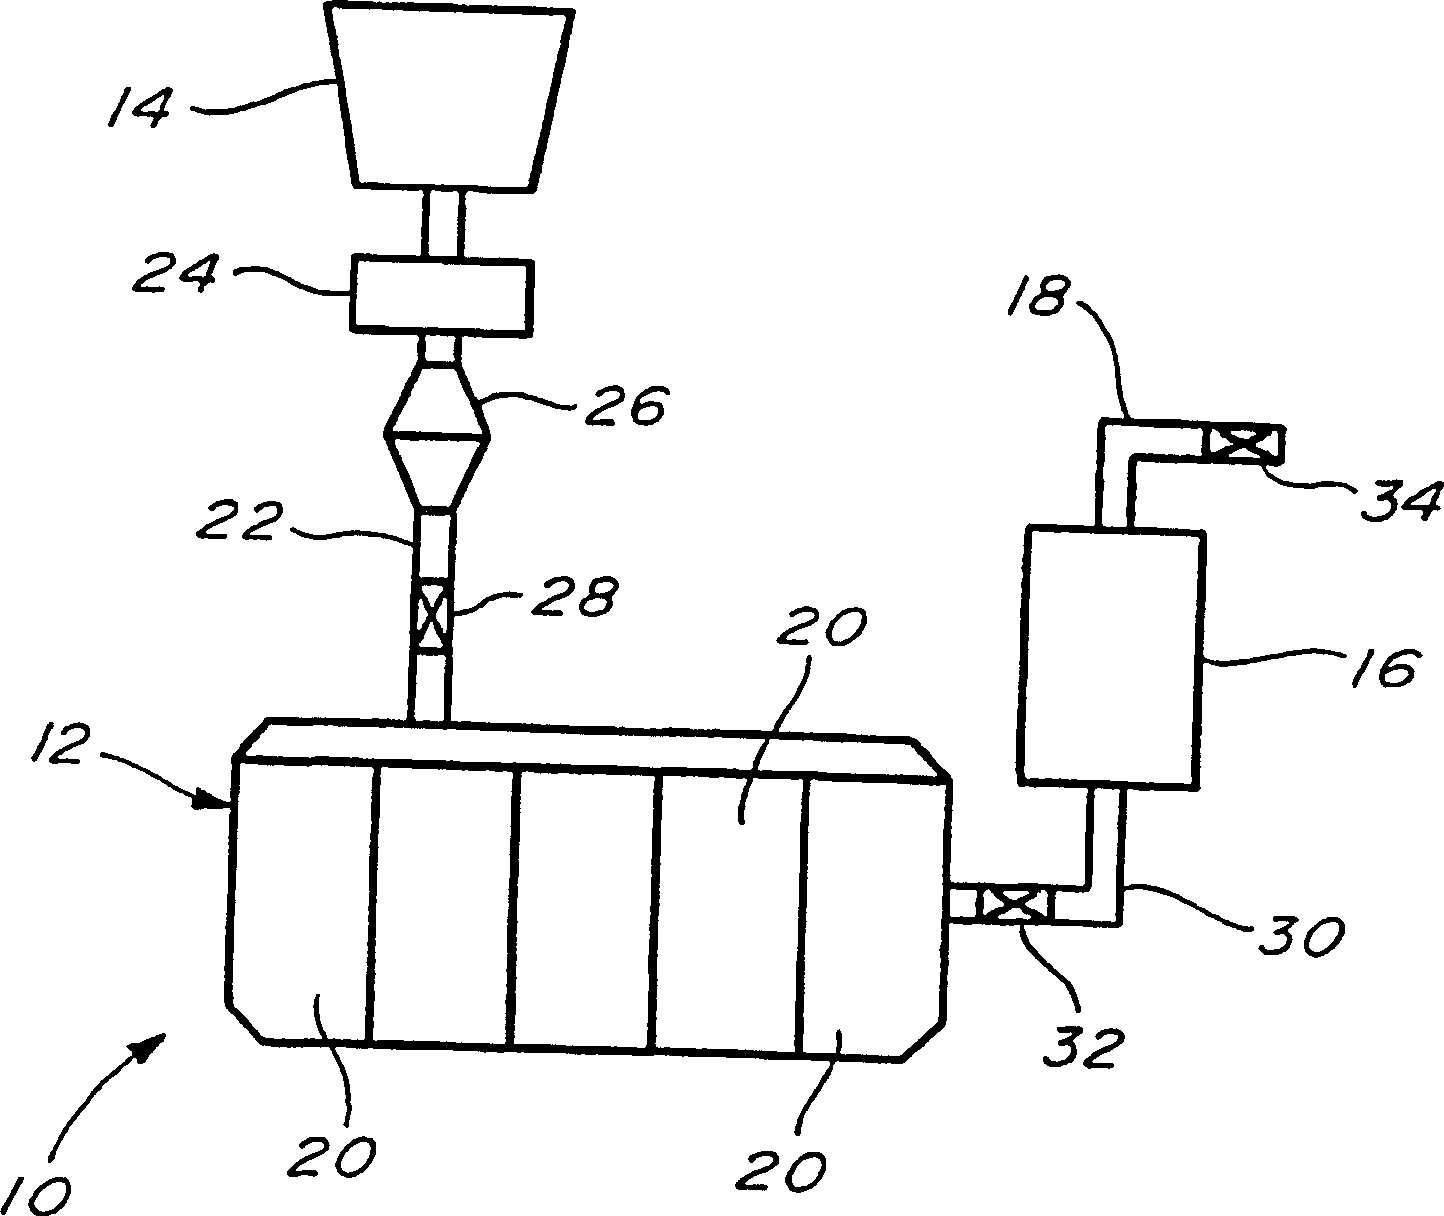 Method of hydrogen generation for fuel cell applications and a hydrogen-generating system